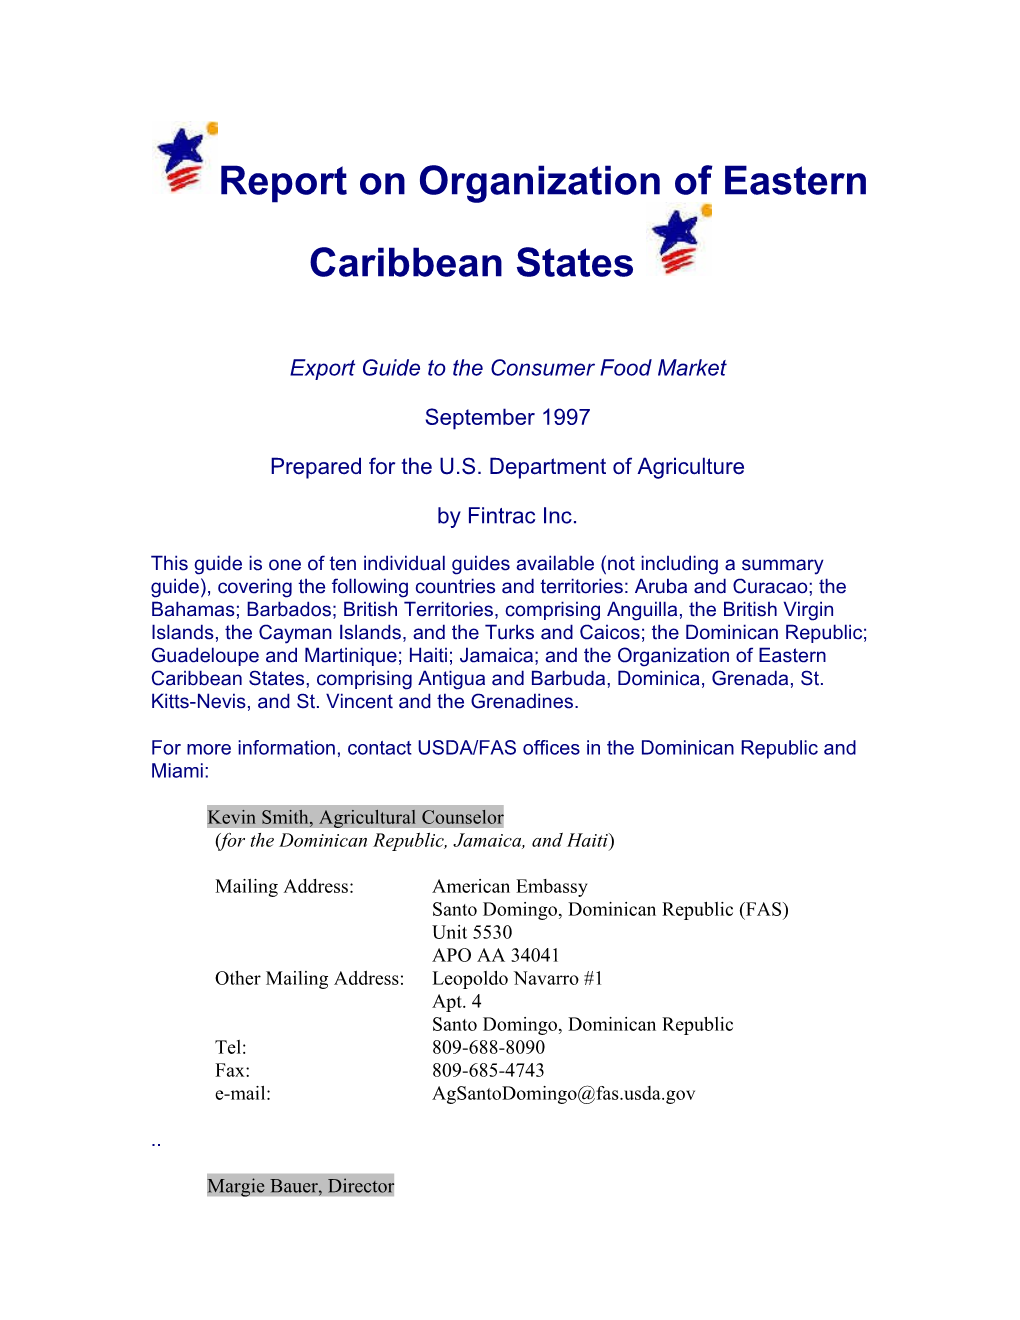 Report on Organization of Eastern Caribbean States